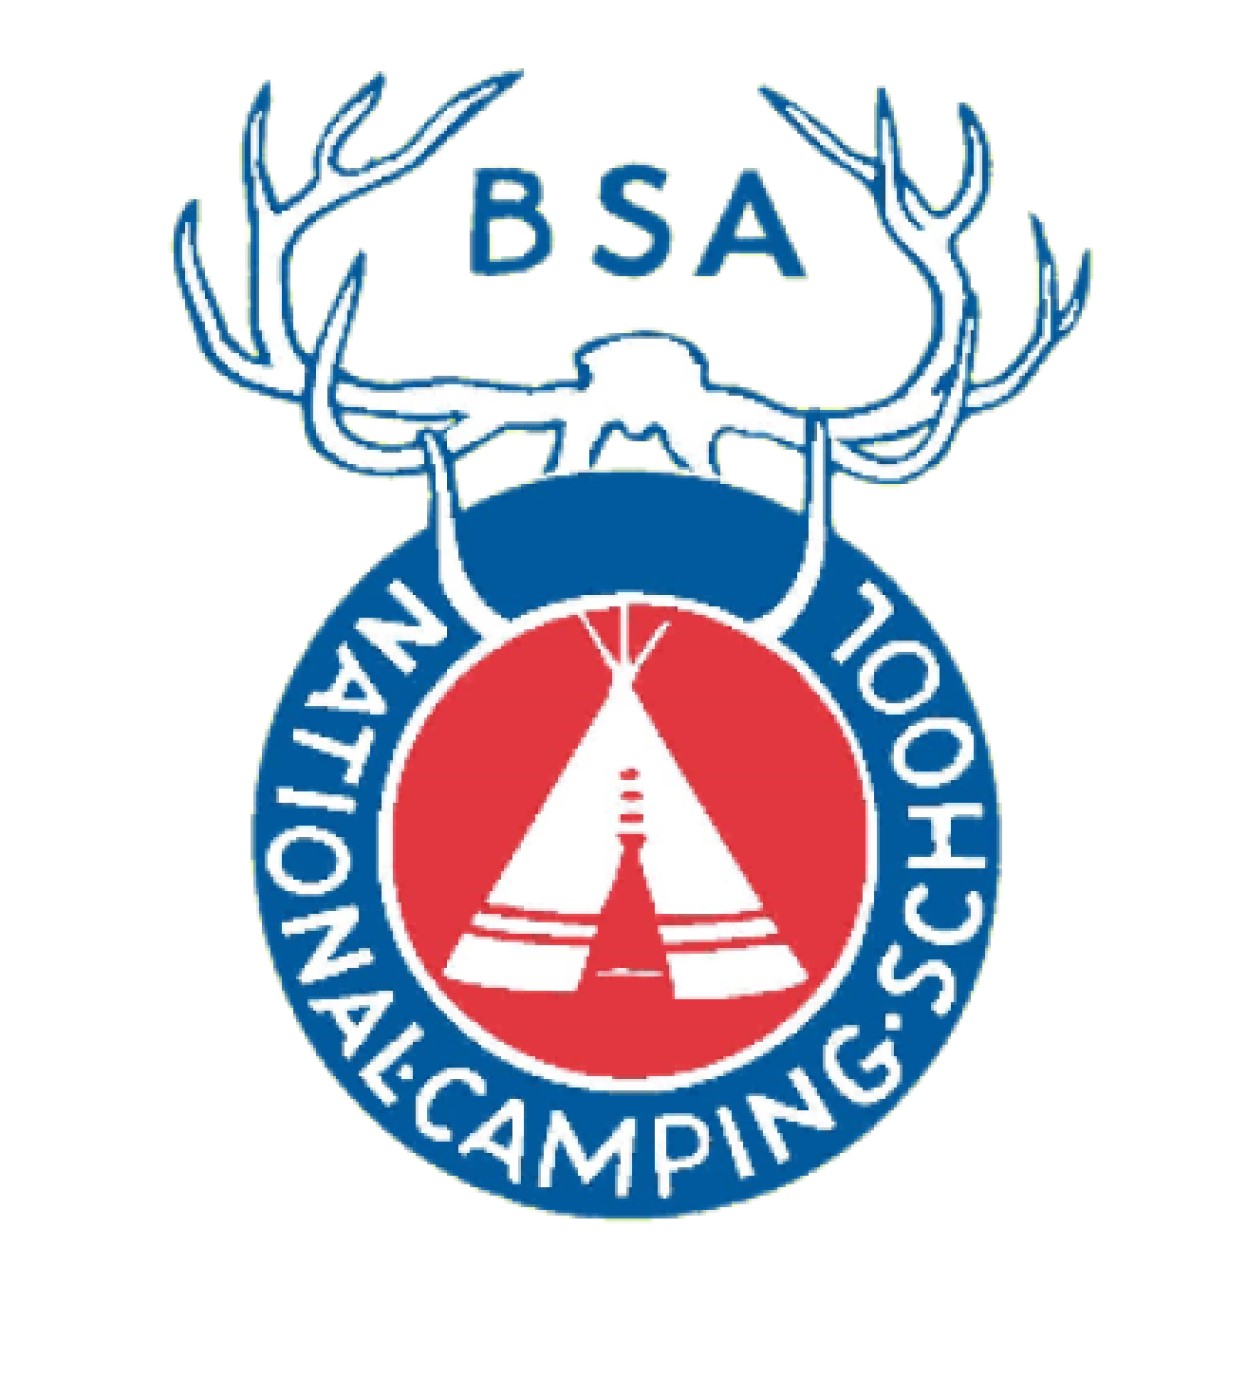 NCS is Cancelled - NOW WHAT? | Boy Scouts of America